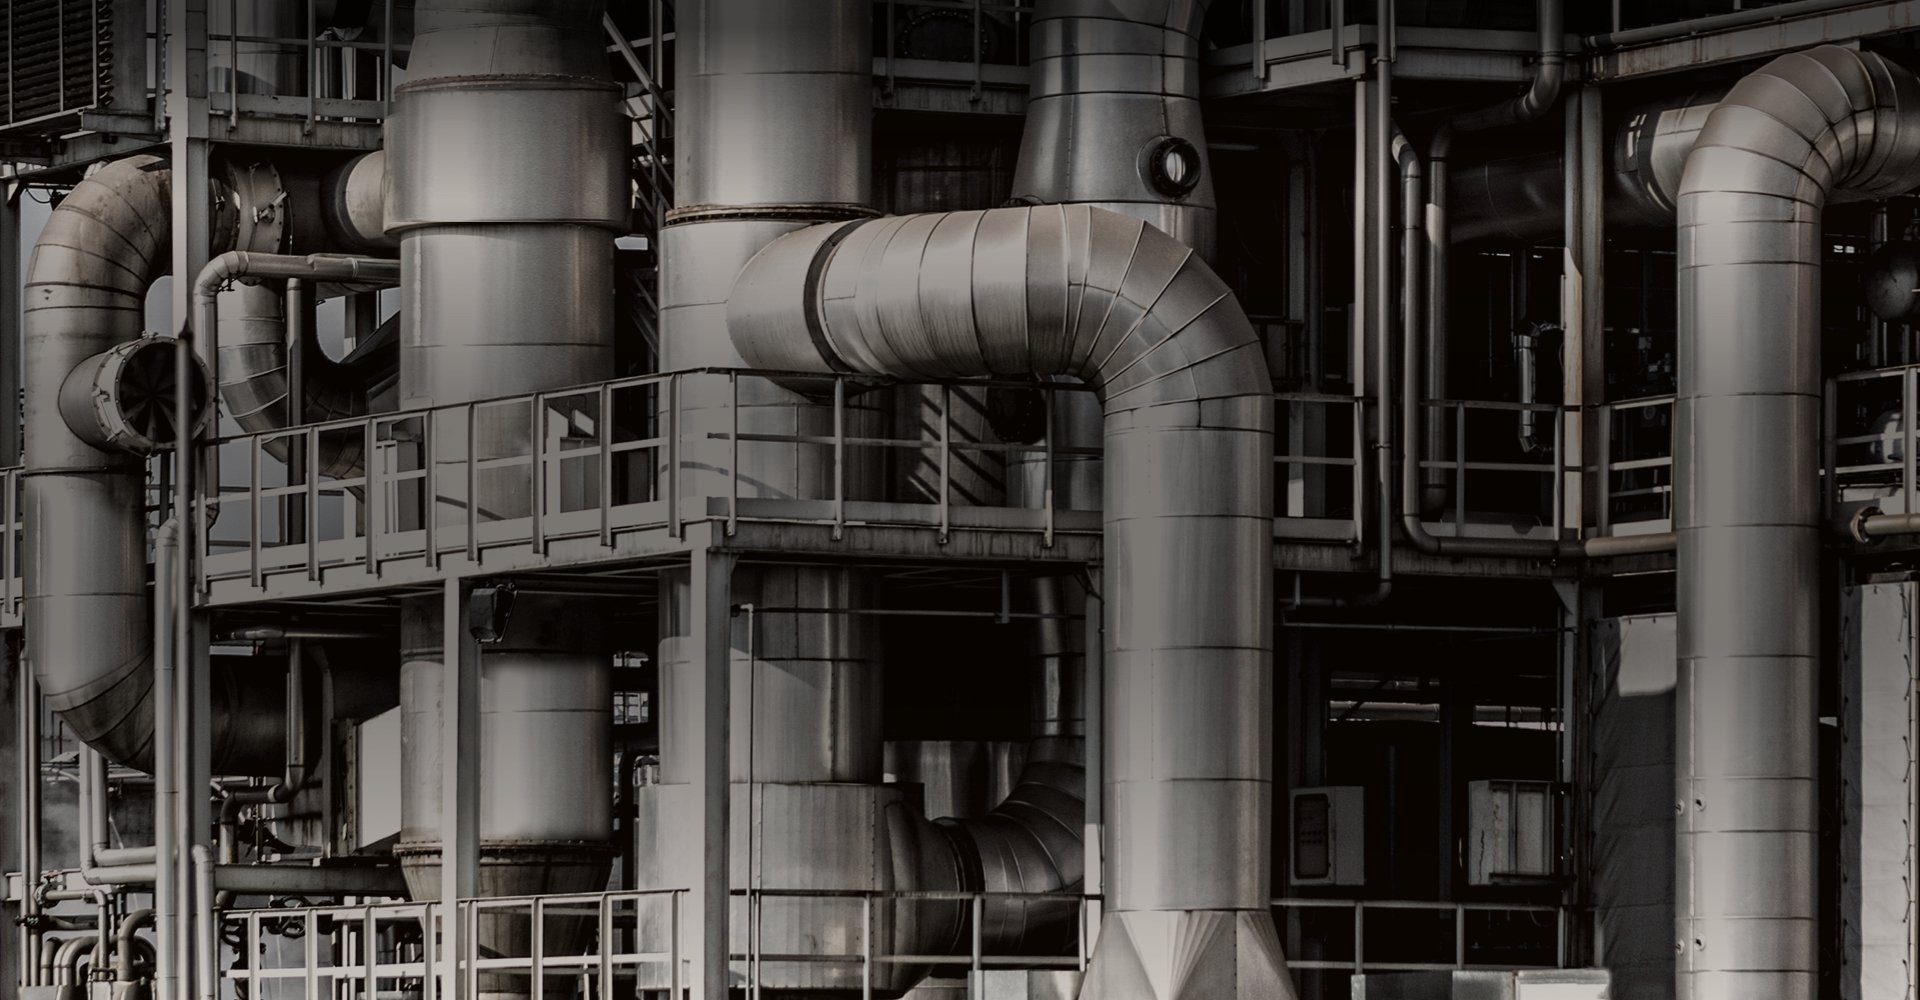  Why?   Industrial Solutions   Emissions-free power &amp; heat for industrial operations 